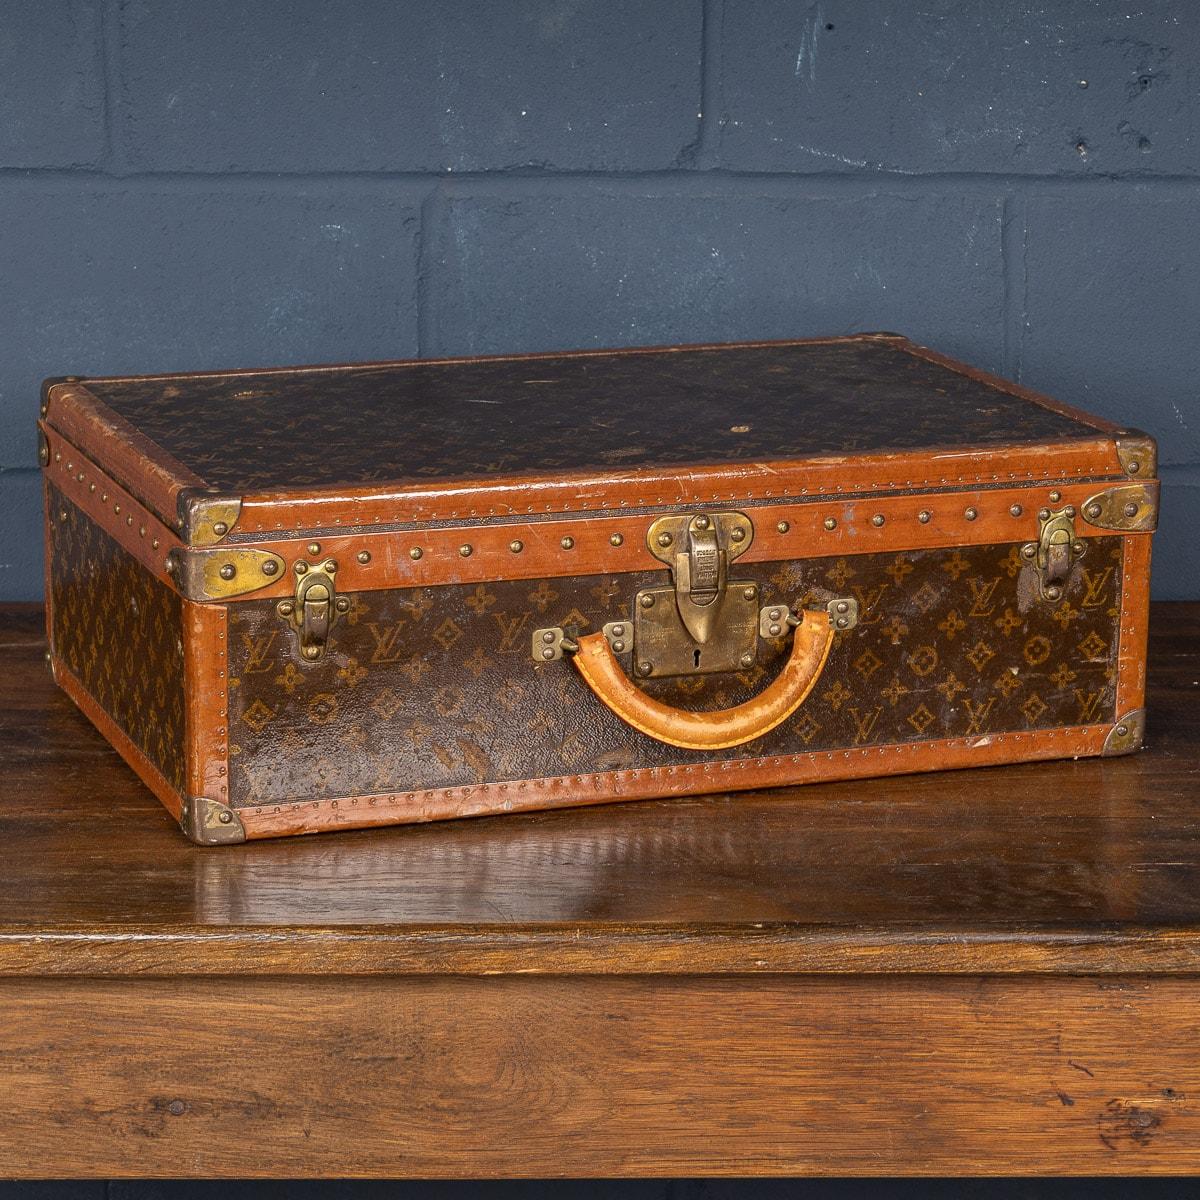 A charming Louis Vuitton hard-sided case, mid 20th century, the exterior finished in the famous monogram canvas with brass fittings. A great piece for use today or as an item for the home.

CONDITION
In overall good vintage condition. Please